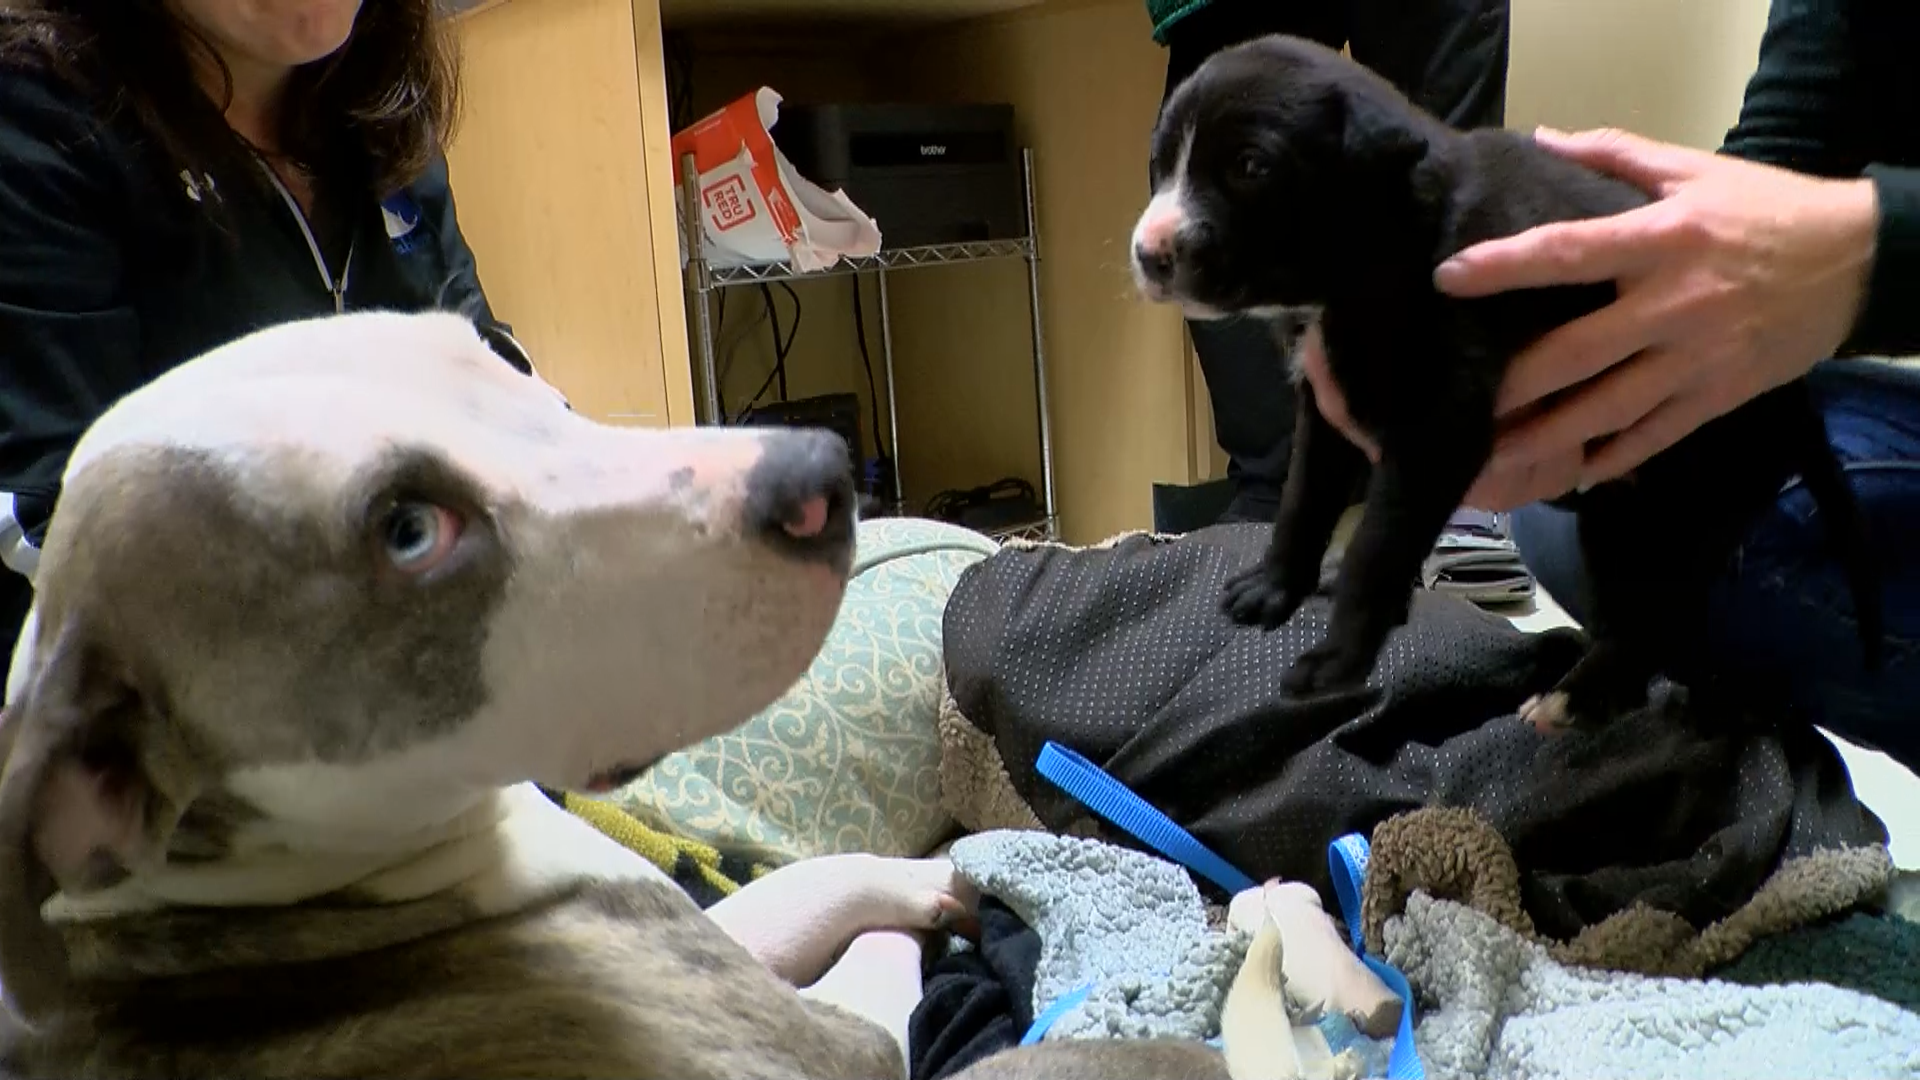 Dog shot, beaten in Grayson Co. saved by Louisville rescuers along with  puppies